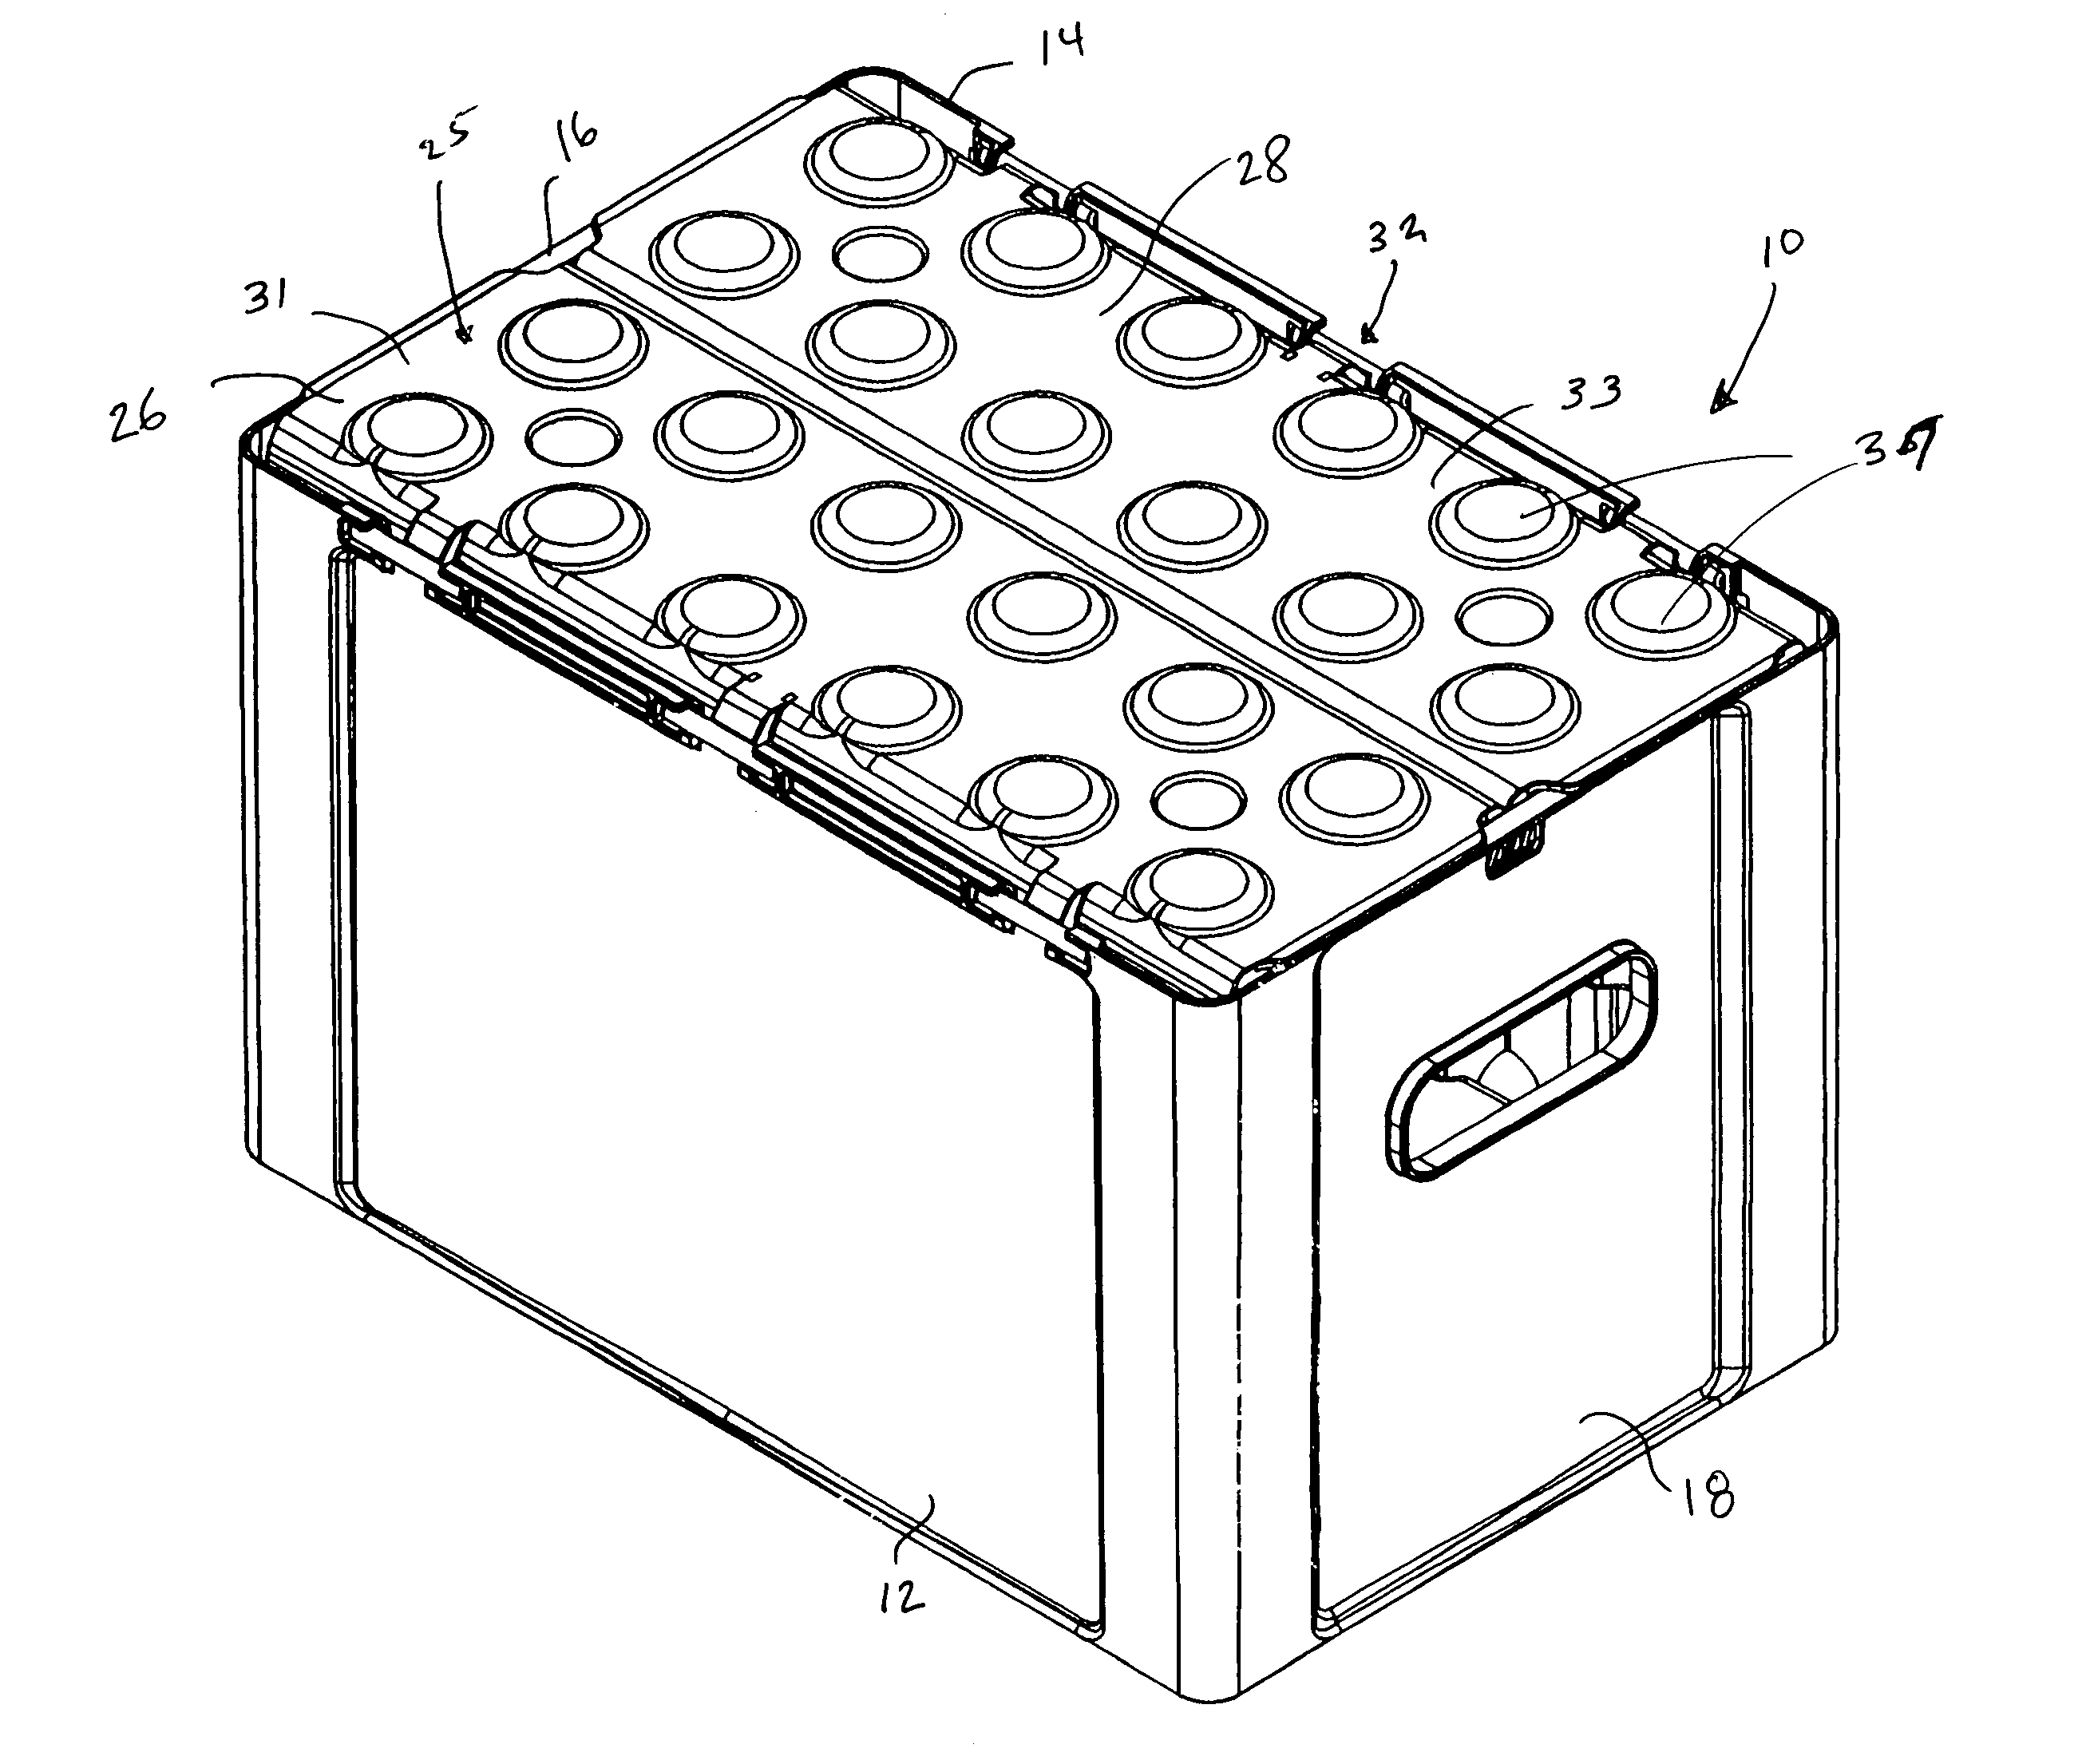 Crate for bottles and other containers